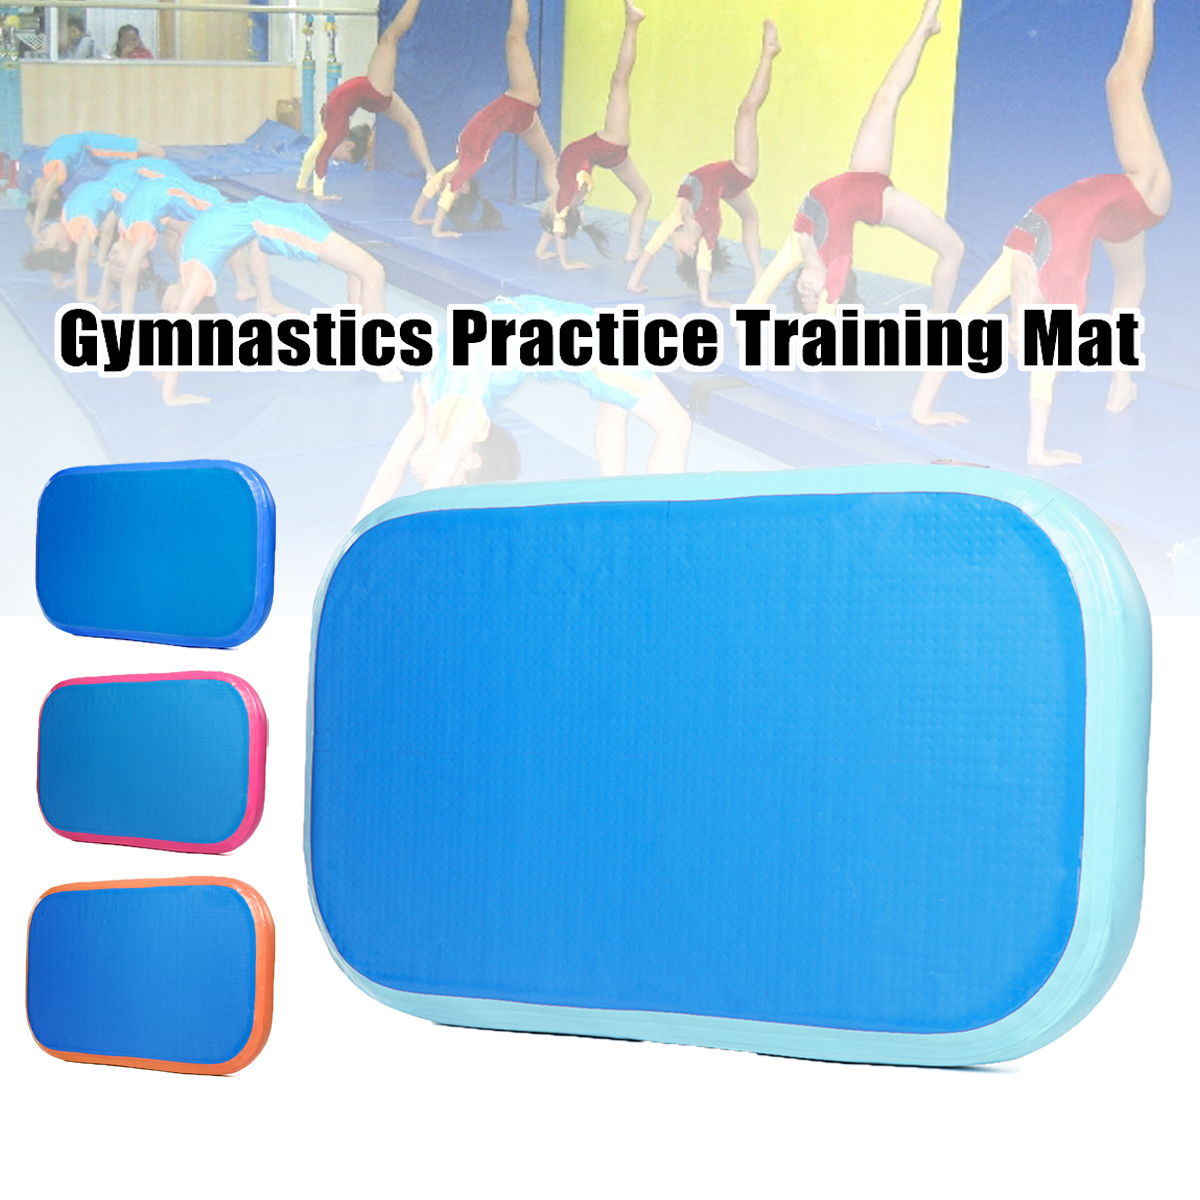 393x236x39inch-Airtrack-Gymnastics-Mat-Inflatable-GYM-Air-Track-Mat-GYM-Practice-Training-Tumbling-M-1313446-1